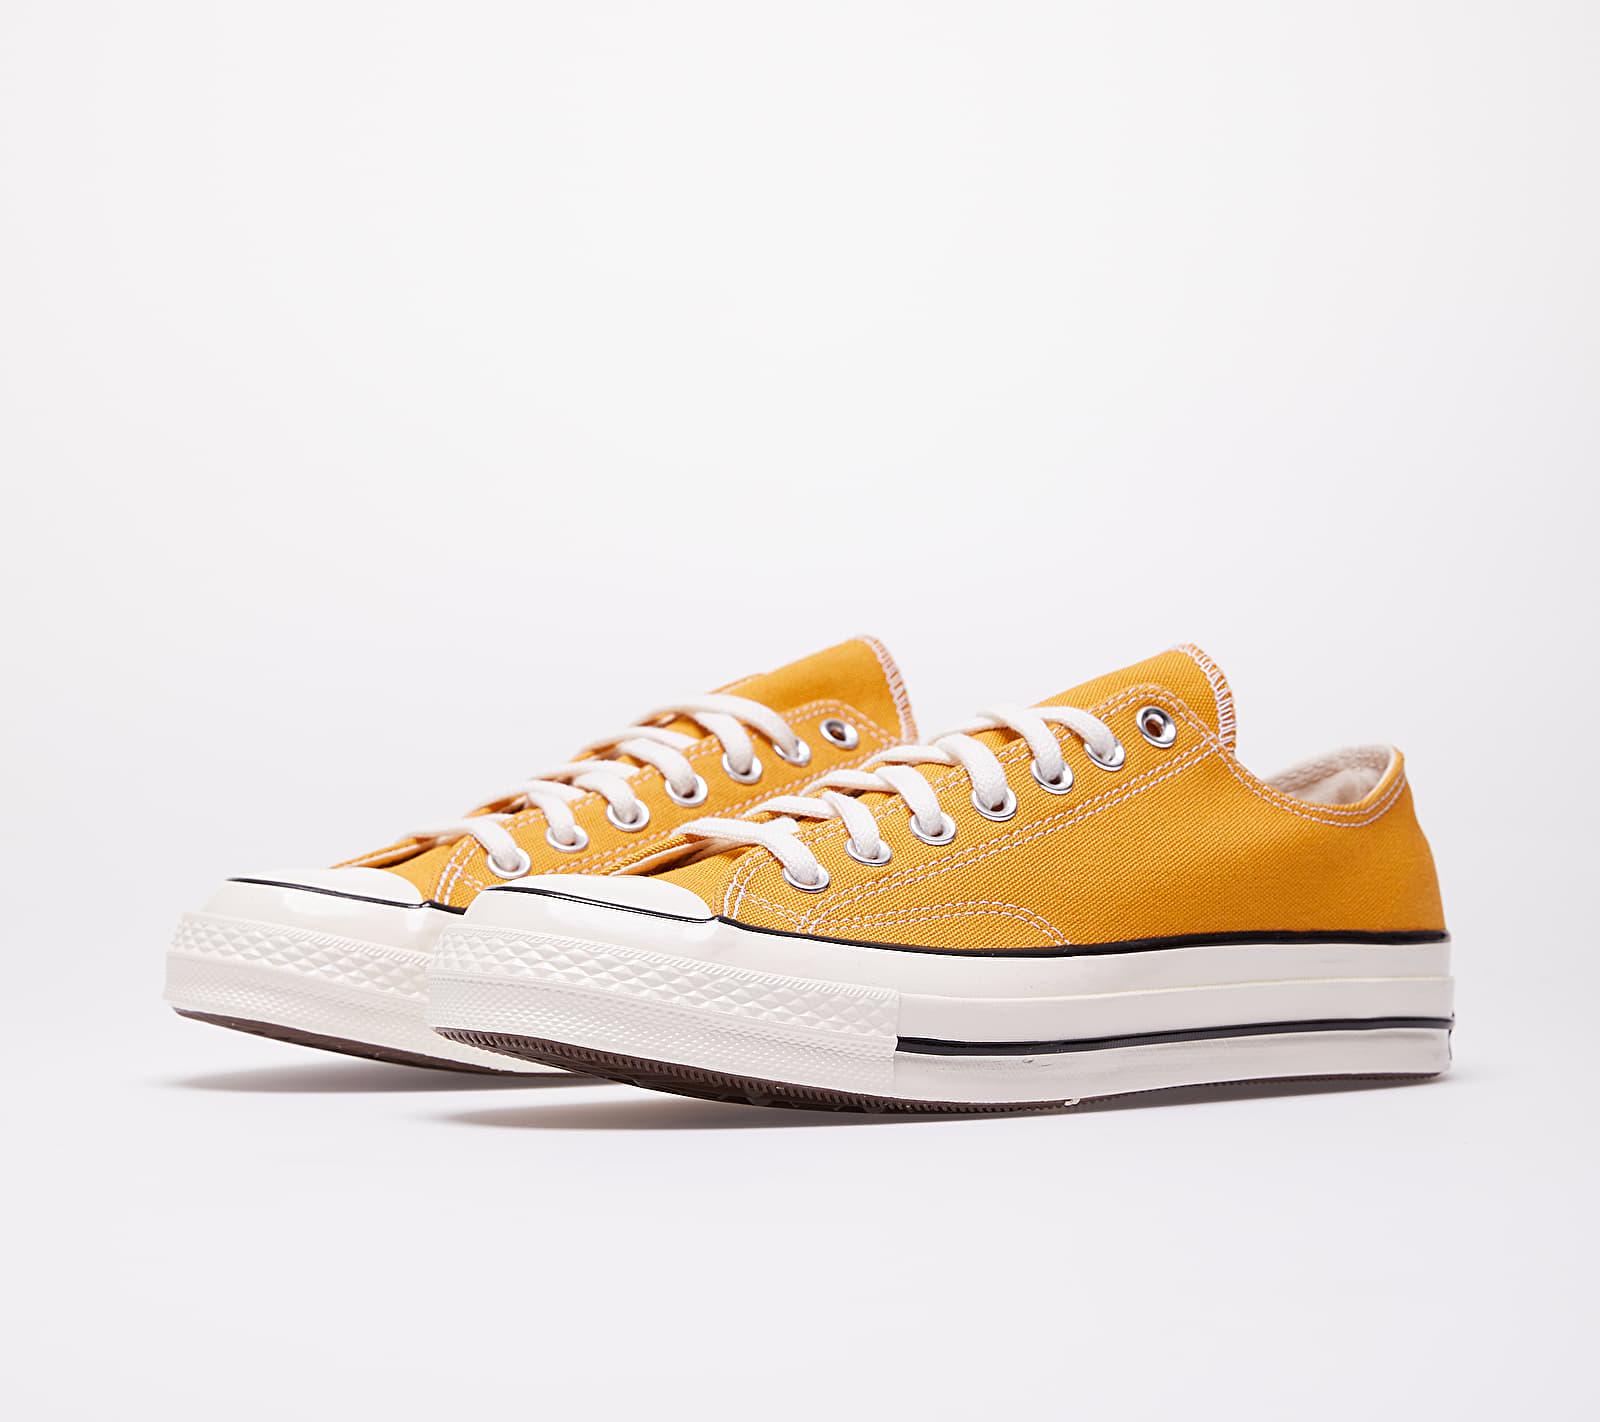 Converse Canvas Sunflower Chuck Taylor All Star 70 Ox Sneakers in Yellow -  Save 39% - Lyst